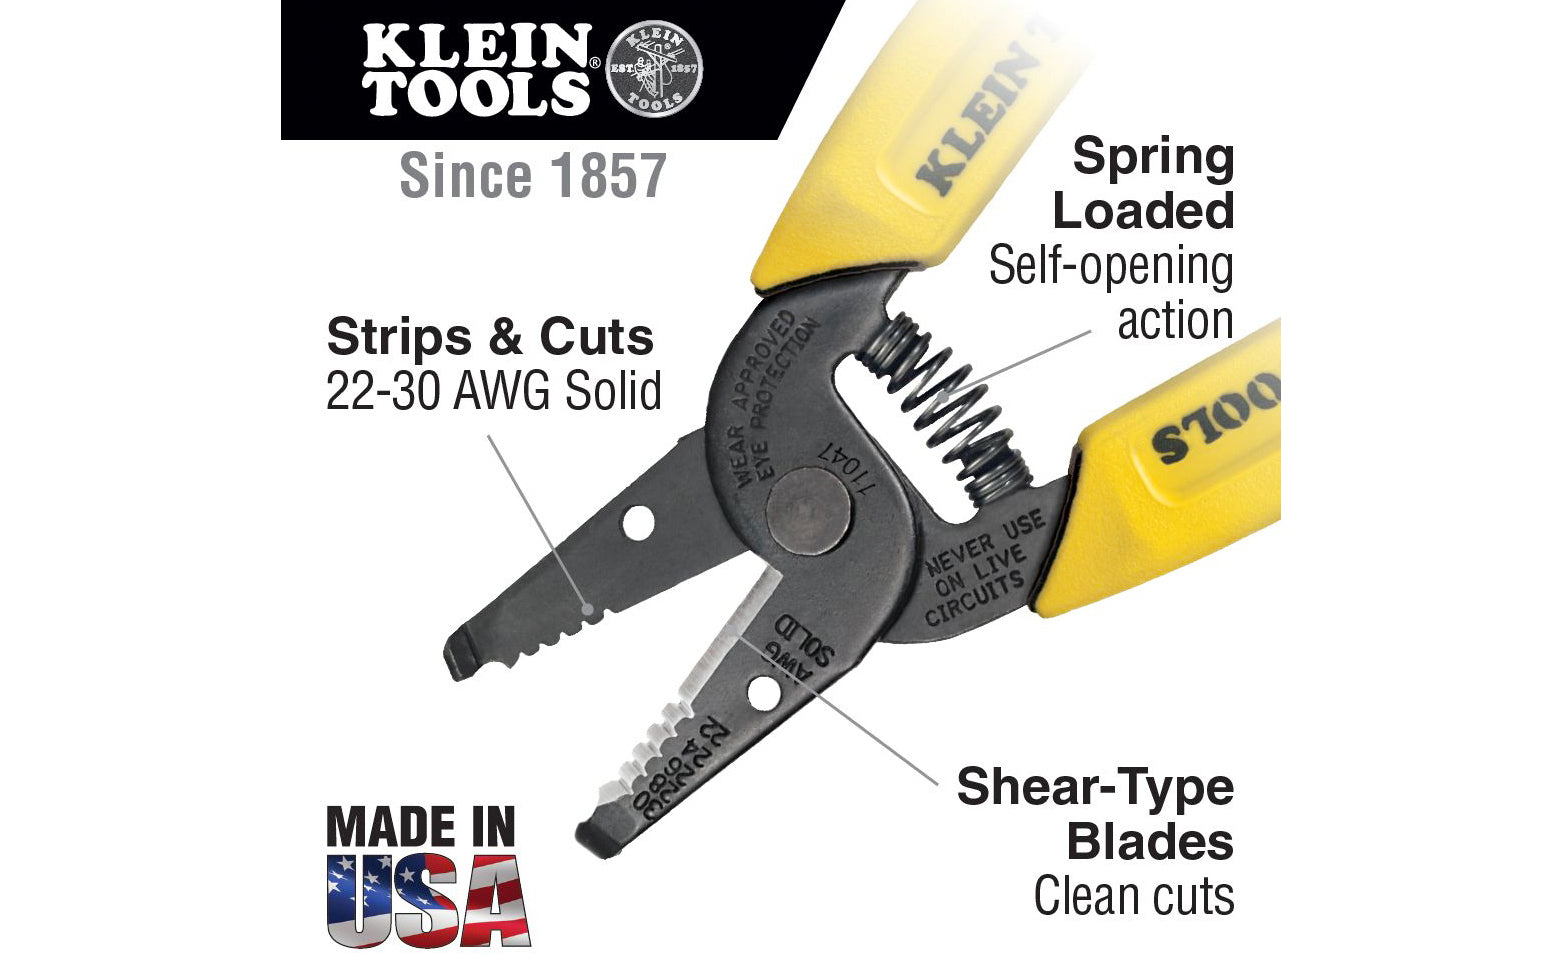 The Klein Tools Wire Stripper/Cutter is a compact & lightweight tool for your stripping & cutting needs. Made from hardened steel for strength, it cuts, strips, loops & bends 22-30 AWG solid wire. The narrow nose reaches into confined spaces. Wire looping & bending holes. Model 11047. 092644740473